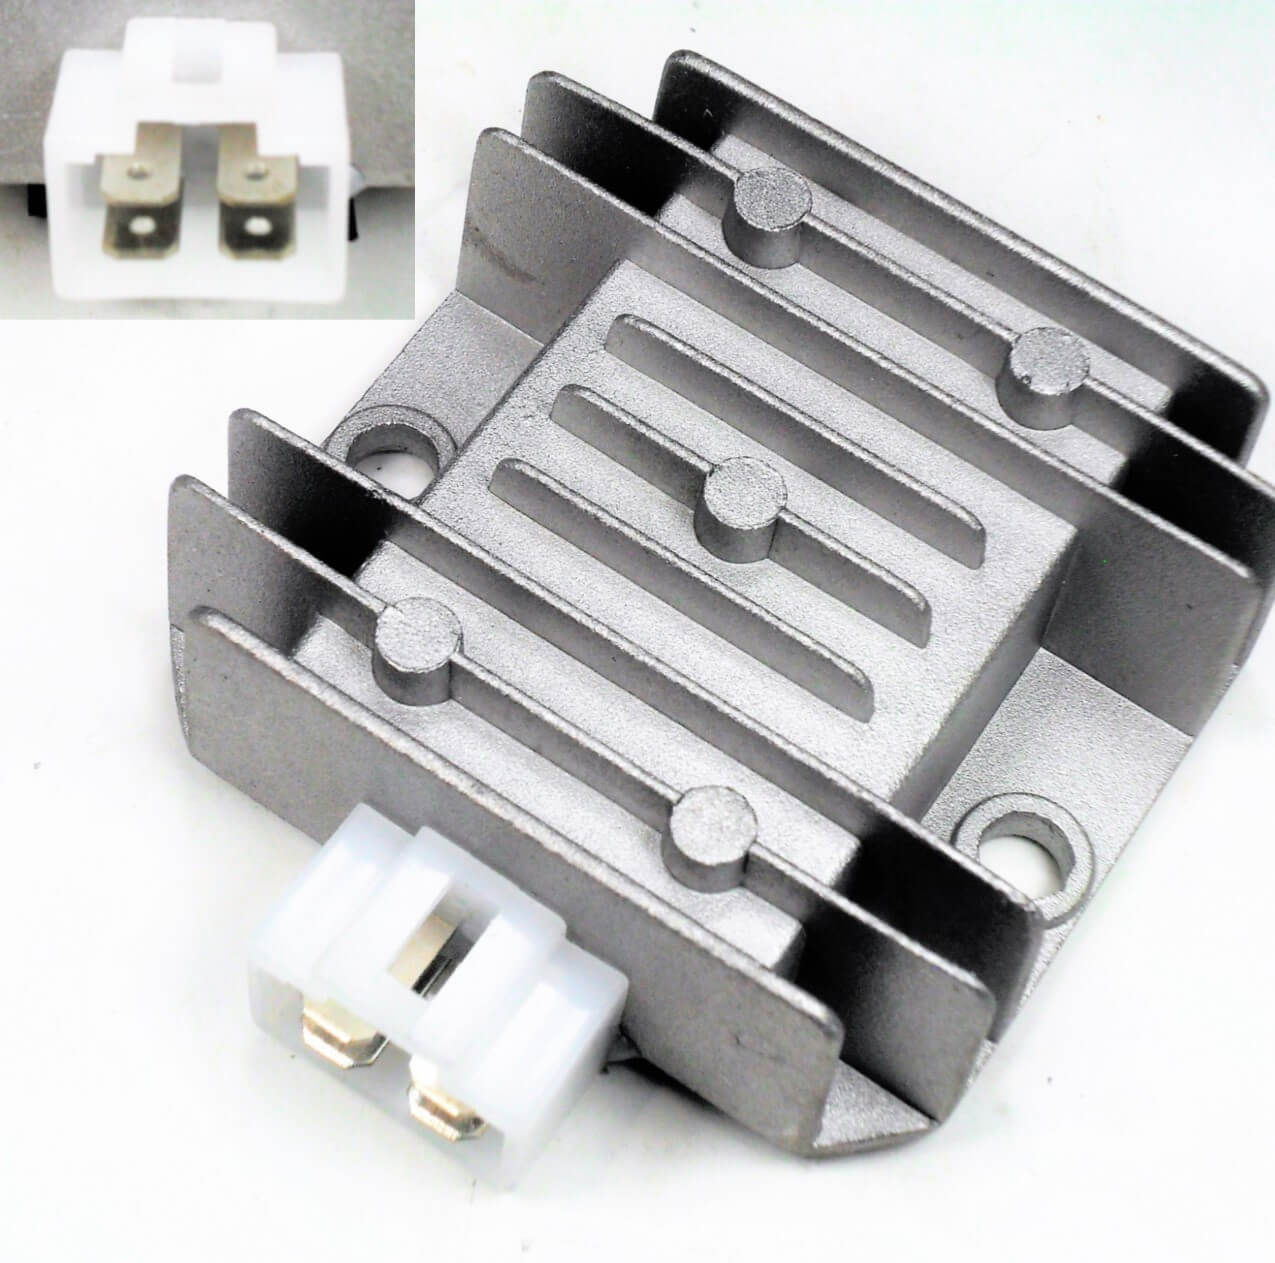 Voltage Regulator Rectifier 110-125cc Chinese ATV, SCOOTERs 4 Pins in 4 Pin Jack 66x72 Bolts Ctr to Ctr 55mm